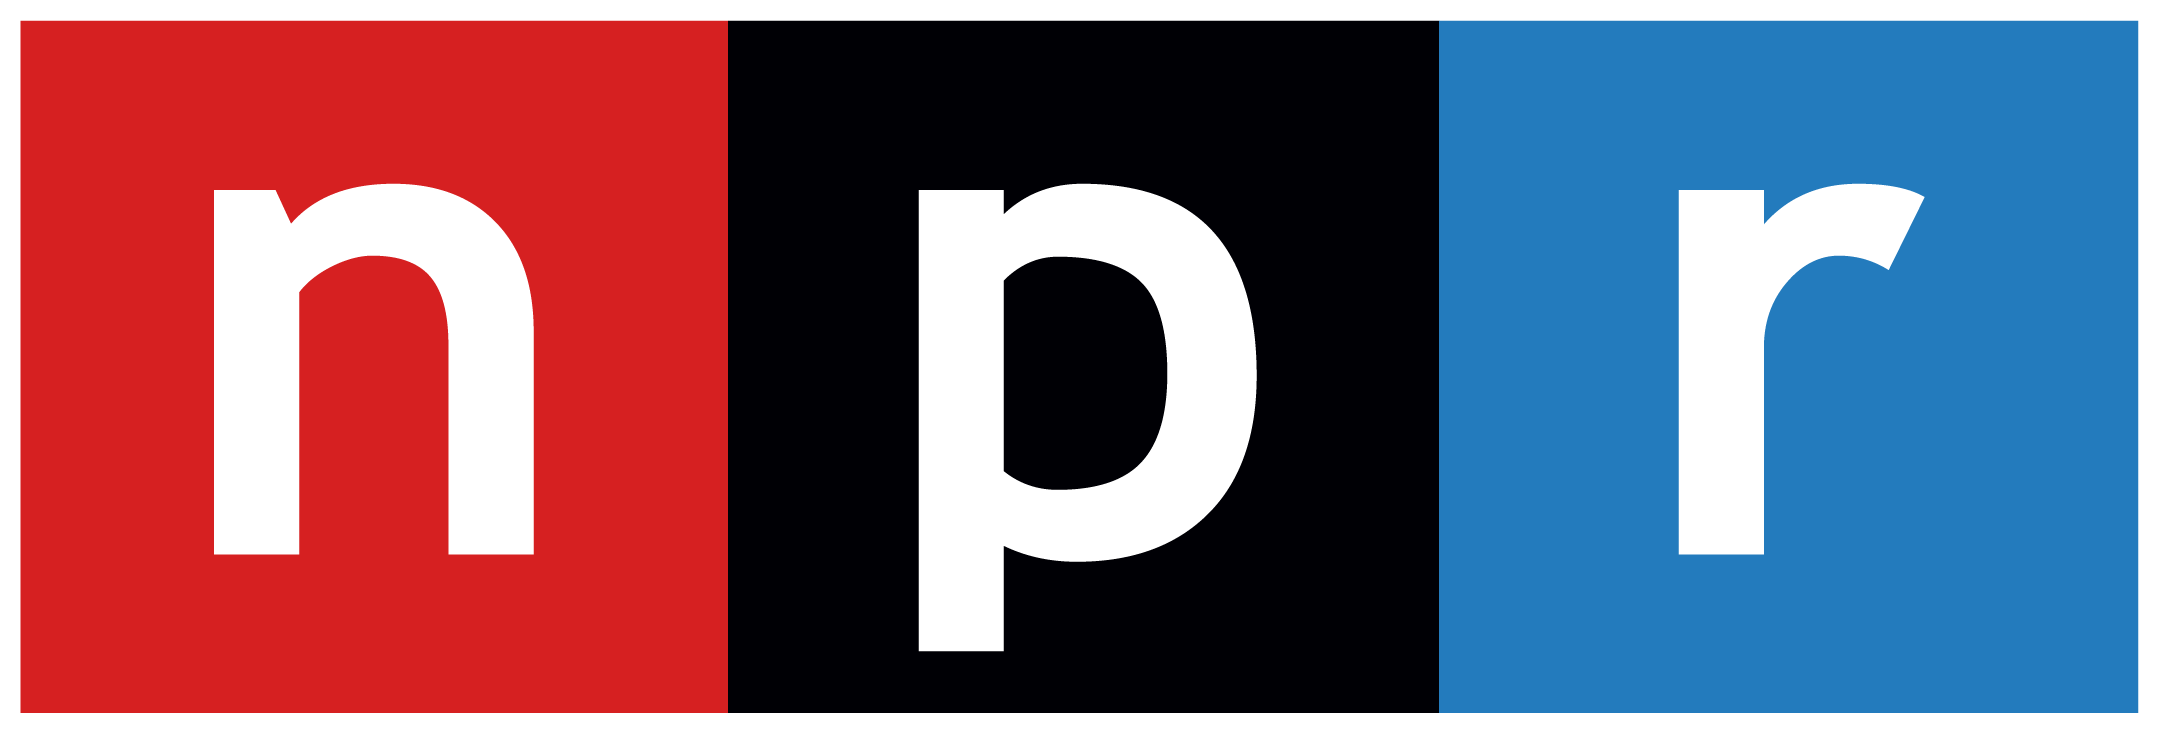 Proxy for npr.org